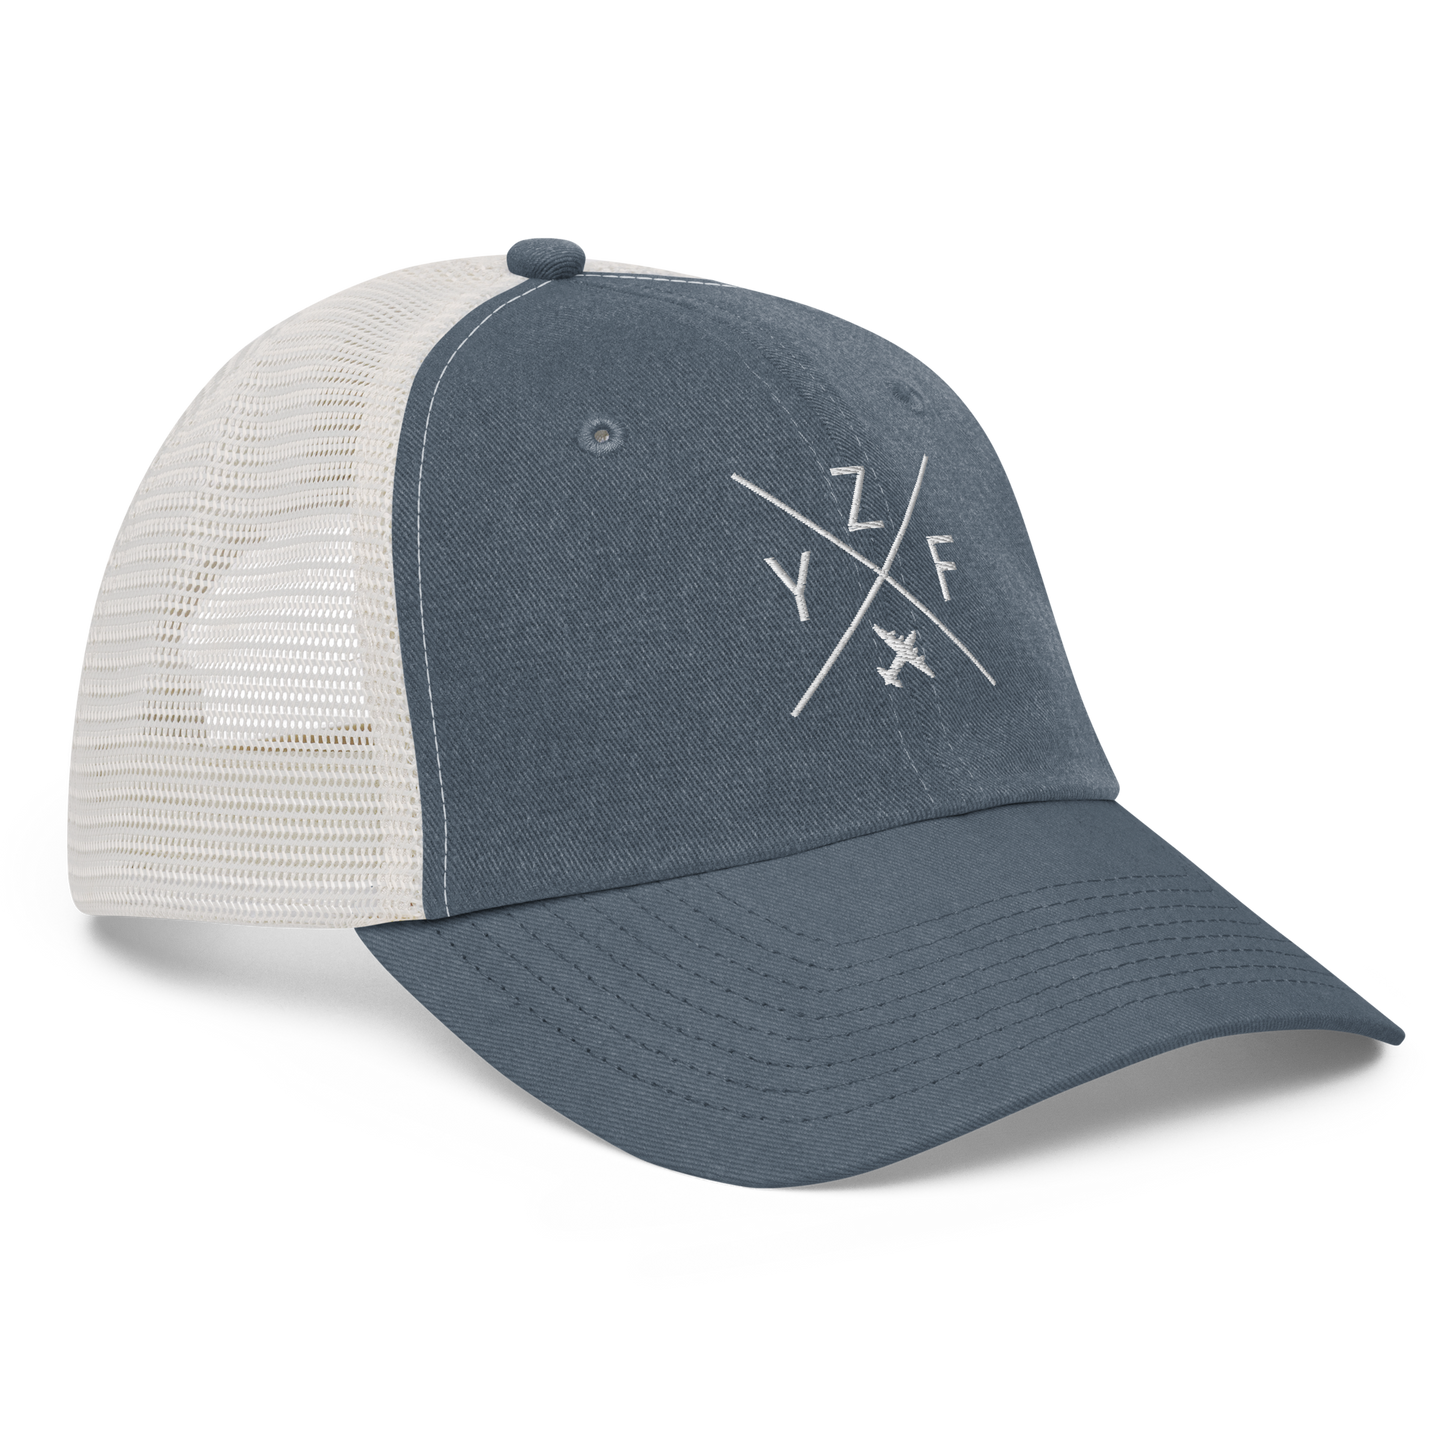 Crossed-X Pigment-Dyed Trucker Cap • YZF Yellowknife • YHM Designs - Image 07